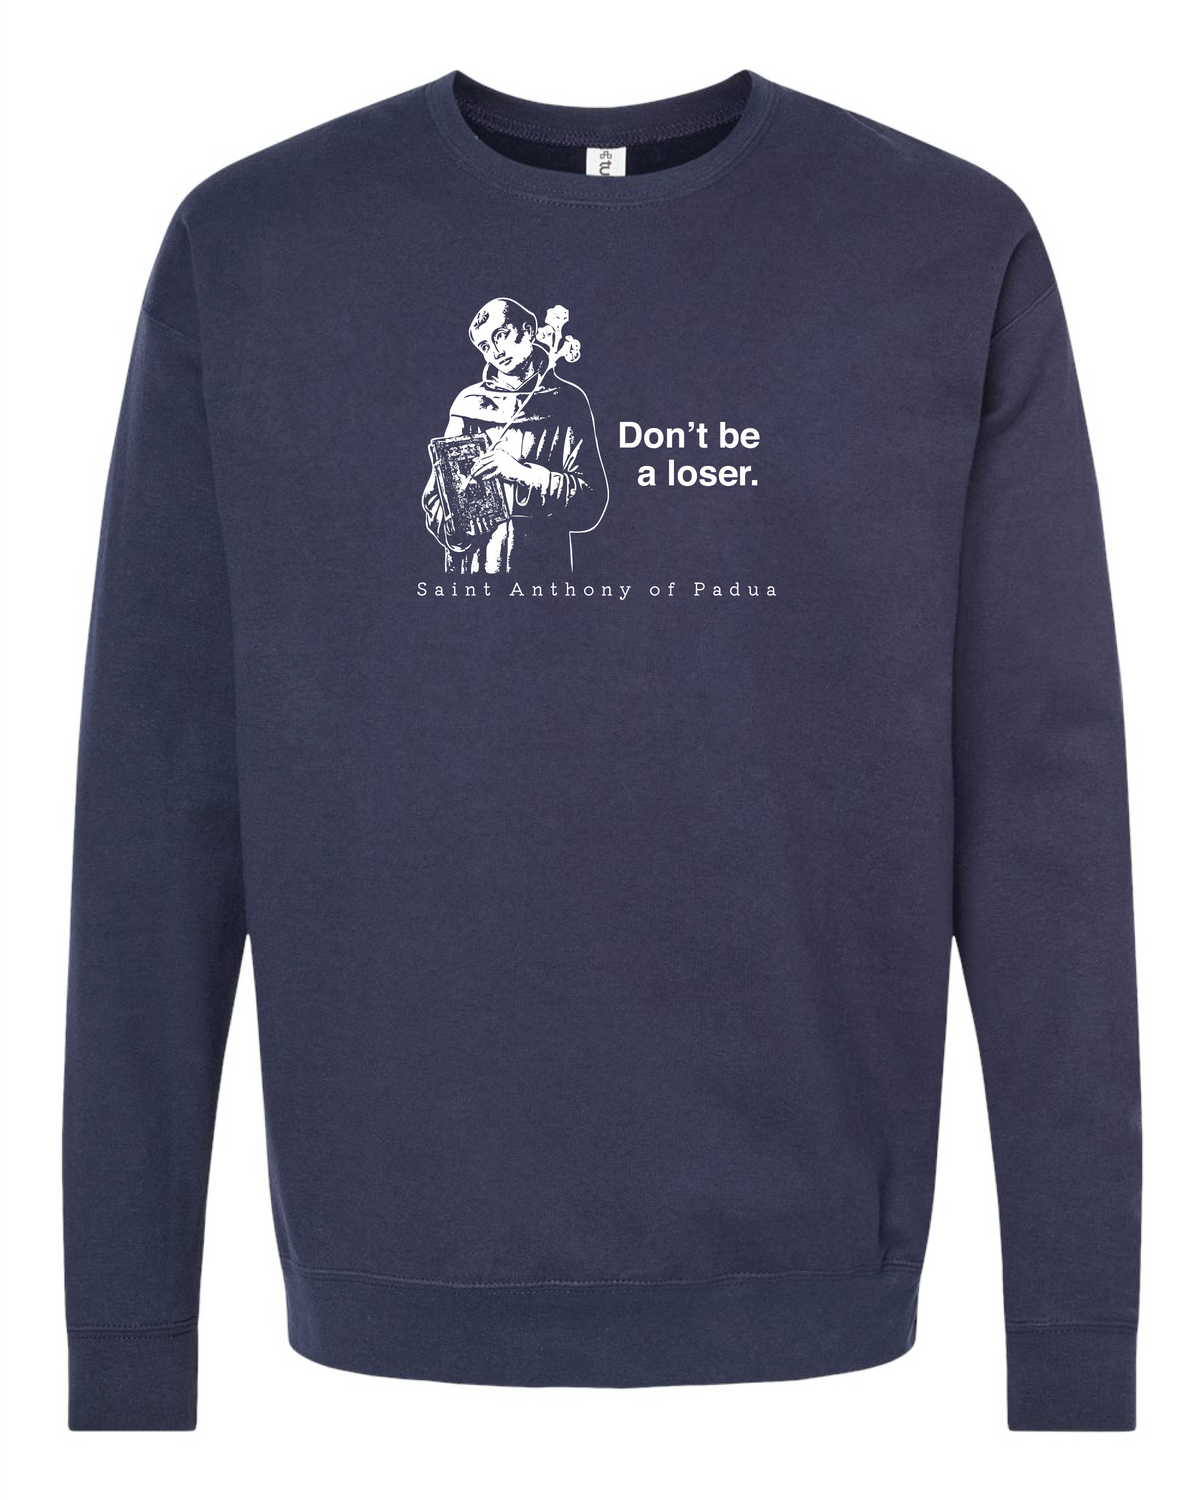 Don't Be a Loser - St. Anthony of Padua  Sweatshirt (Crew Neck)